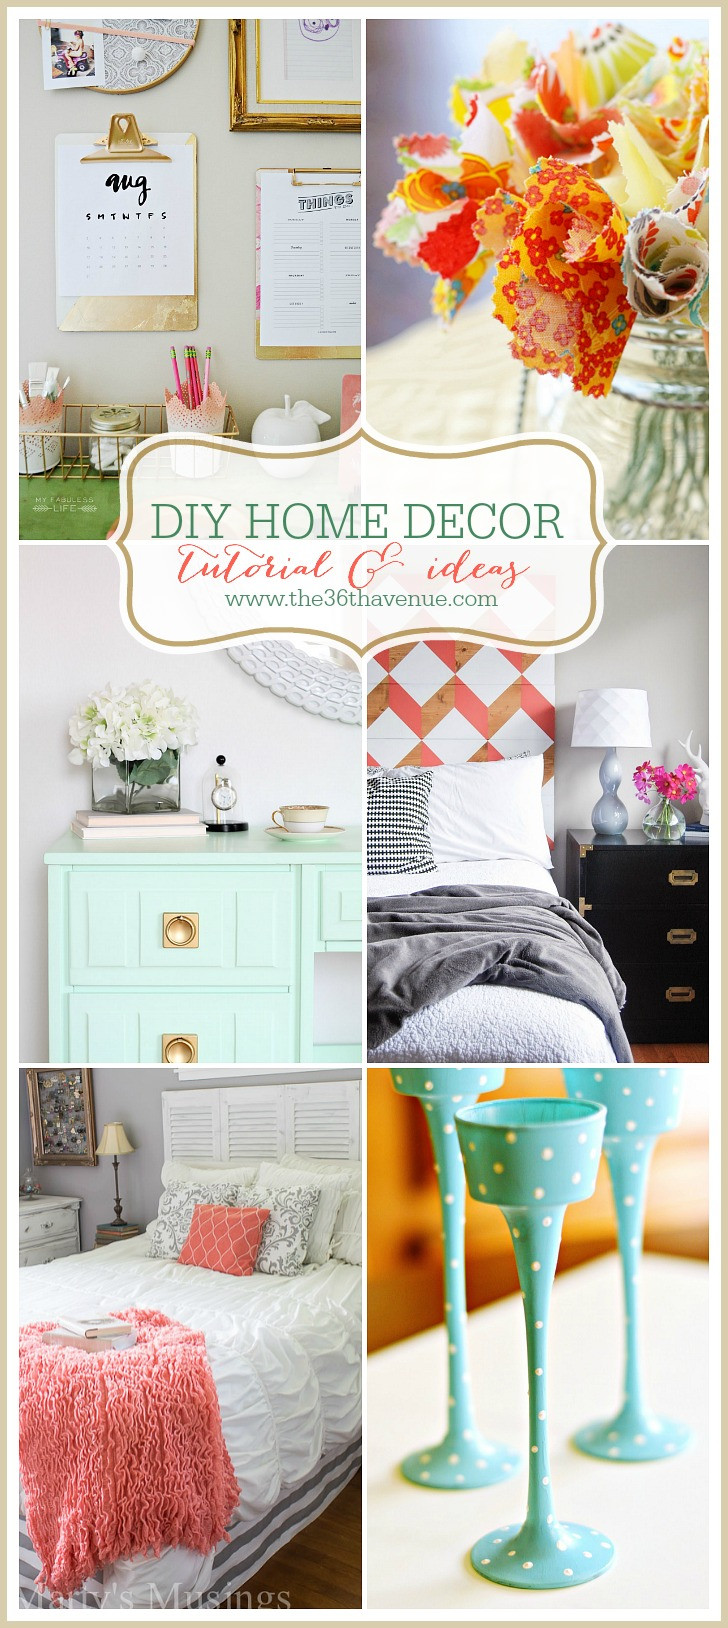 DIY Craft Home Decor
 The 36th AVENUE Home Decor DIY Projects